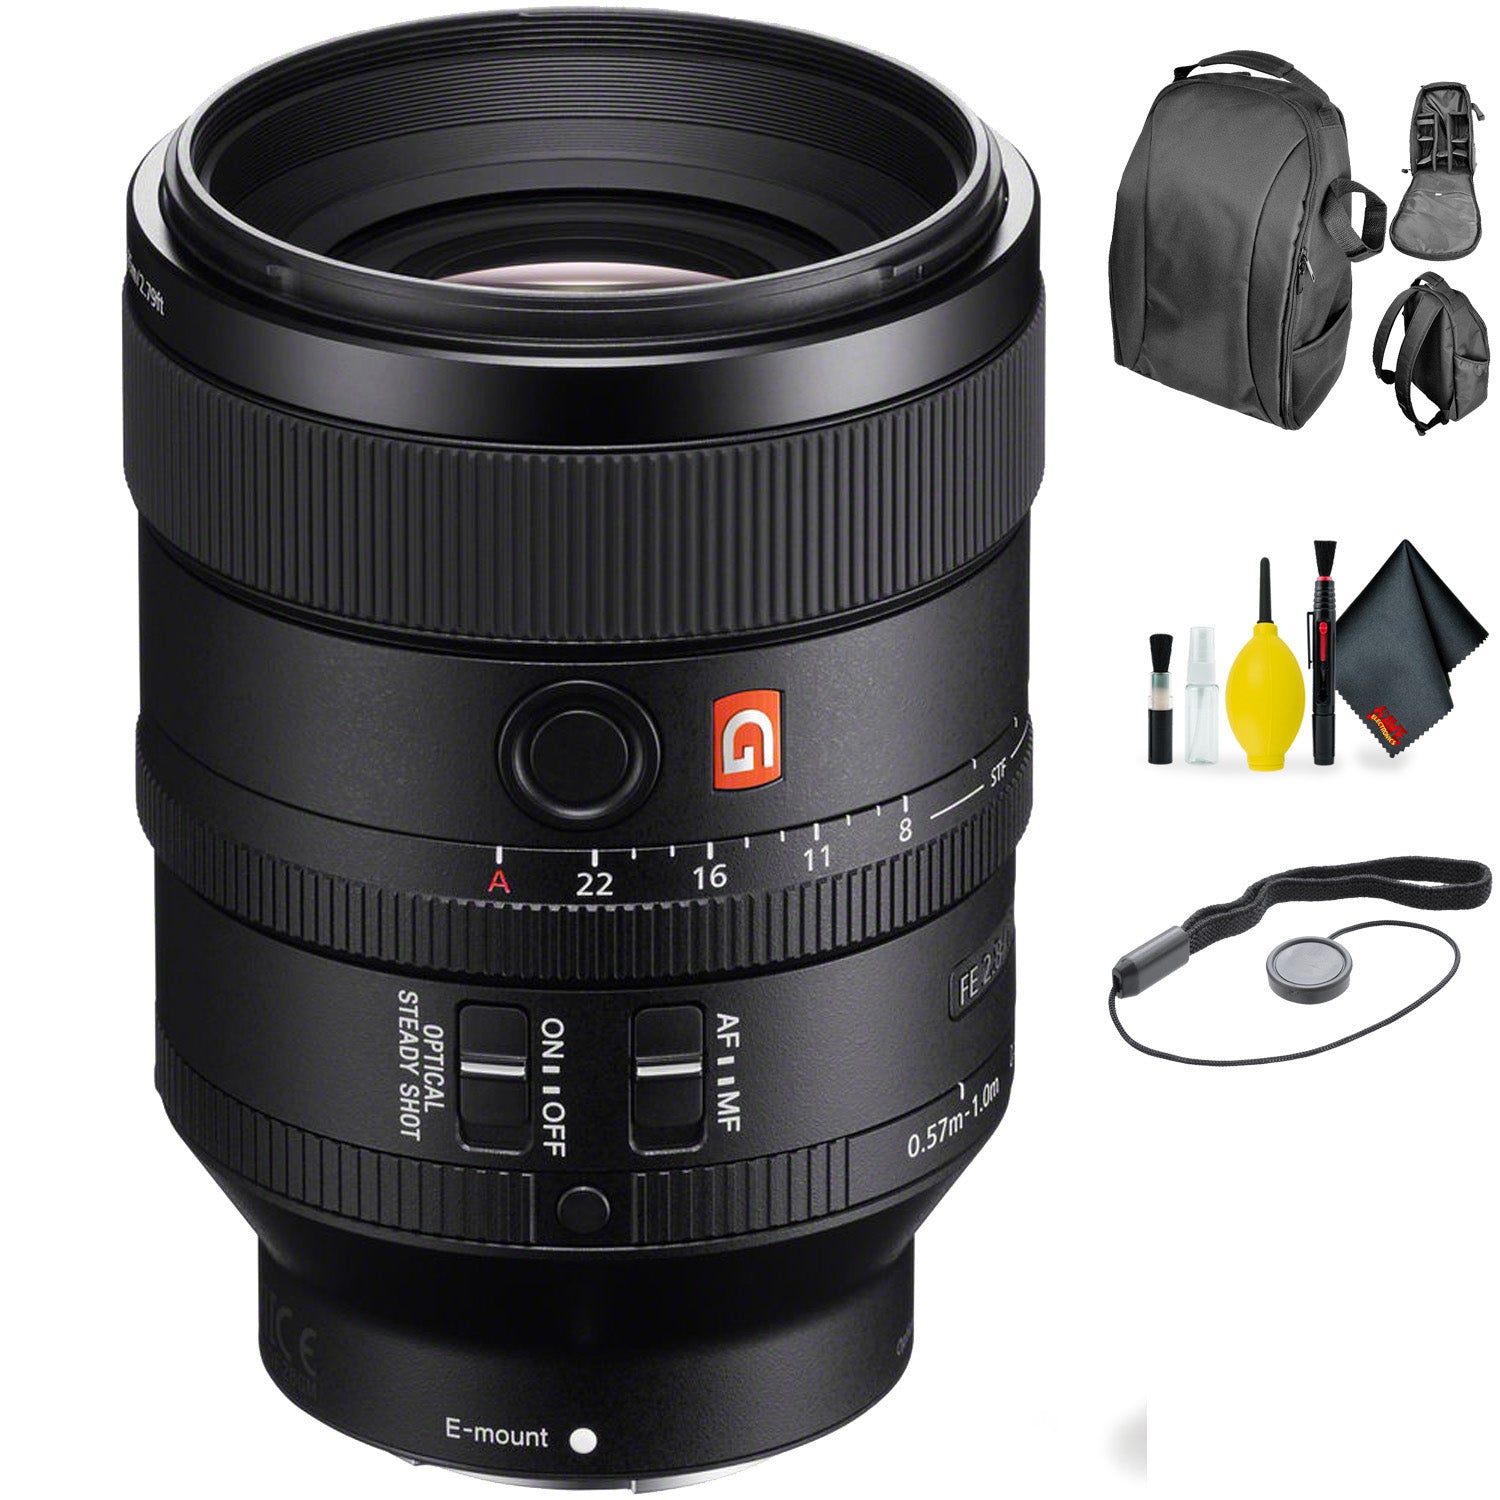 Sony FE 100mm f/2.8 STF GM OSS Lens + Deluxe Lens Cleaning Kit Bundle